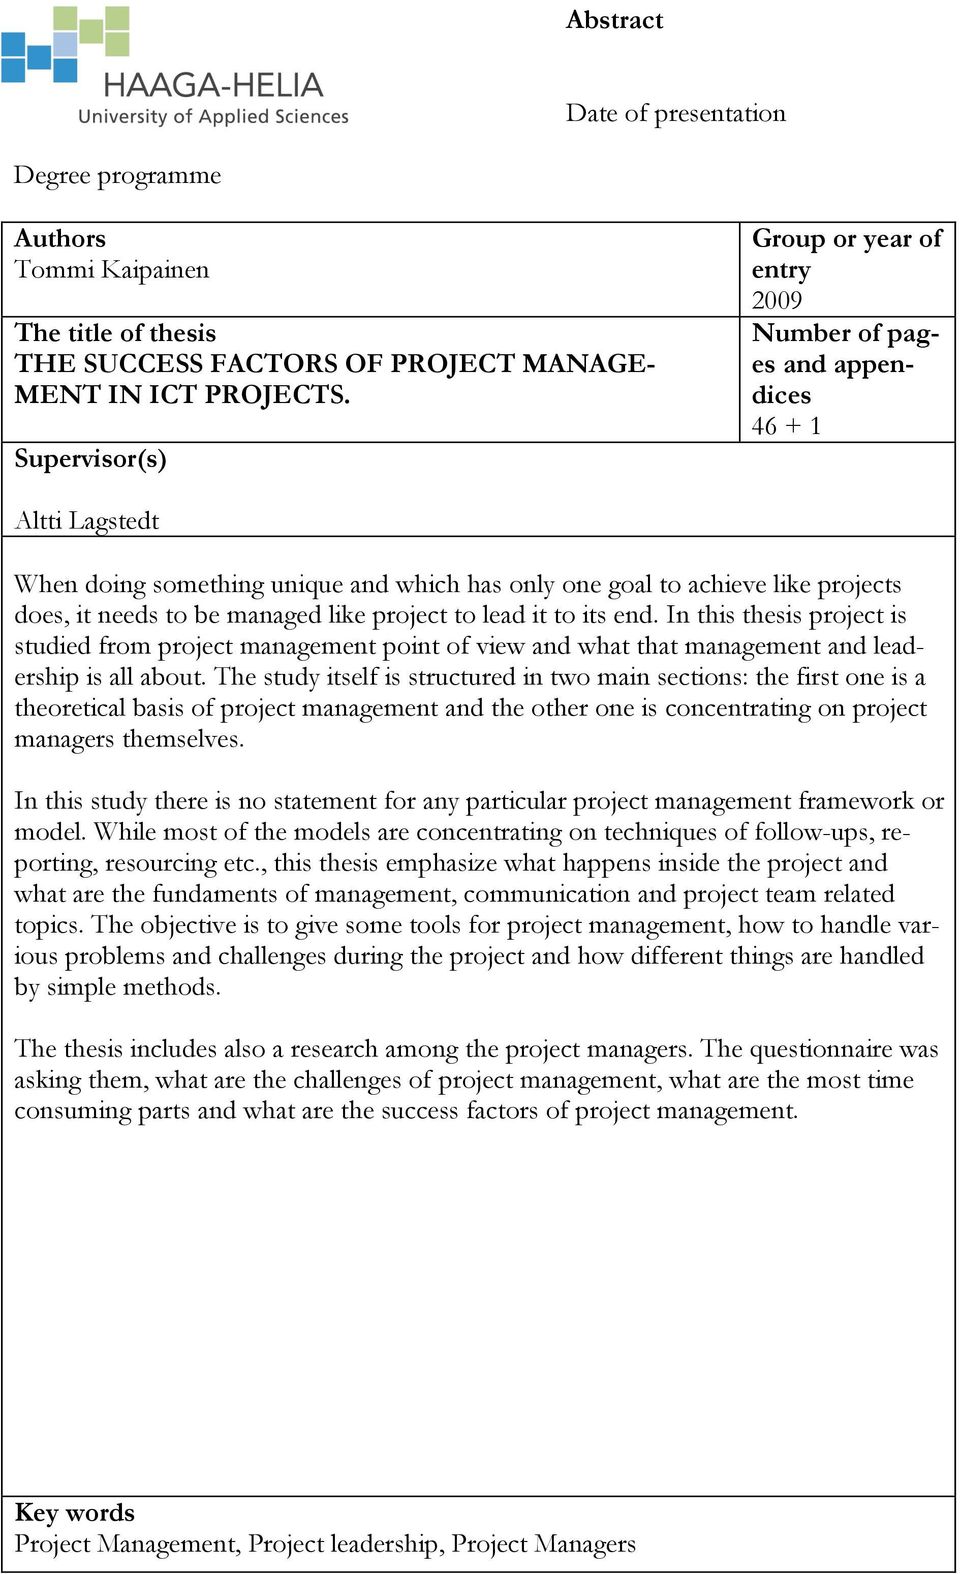 managed like project to lead it to its end. In this thesis project is studied from project management point of view and what that management and leadership is all about.